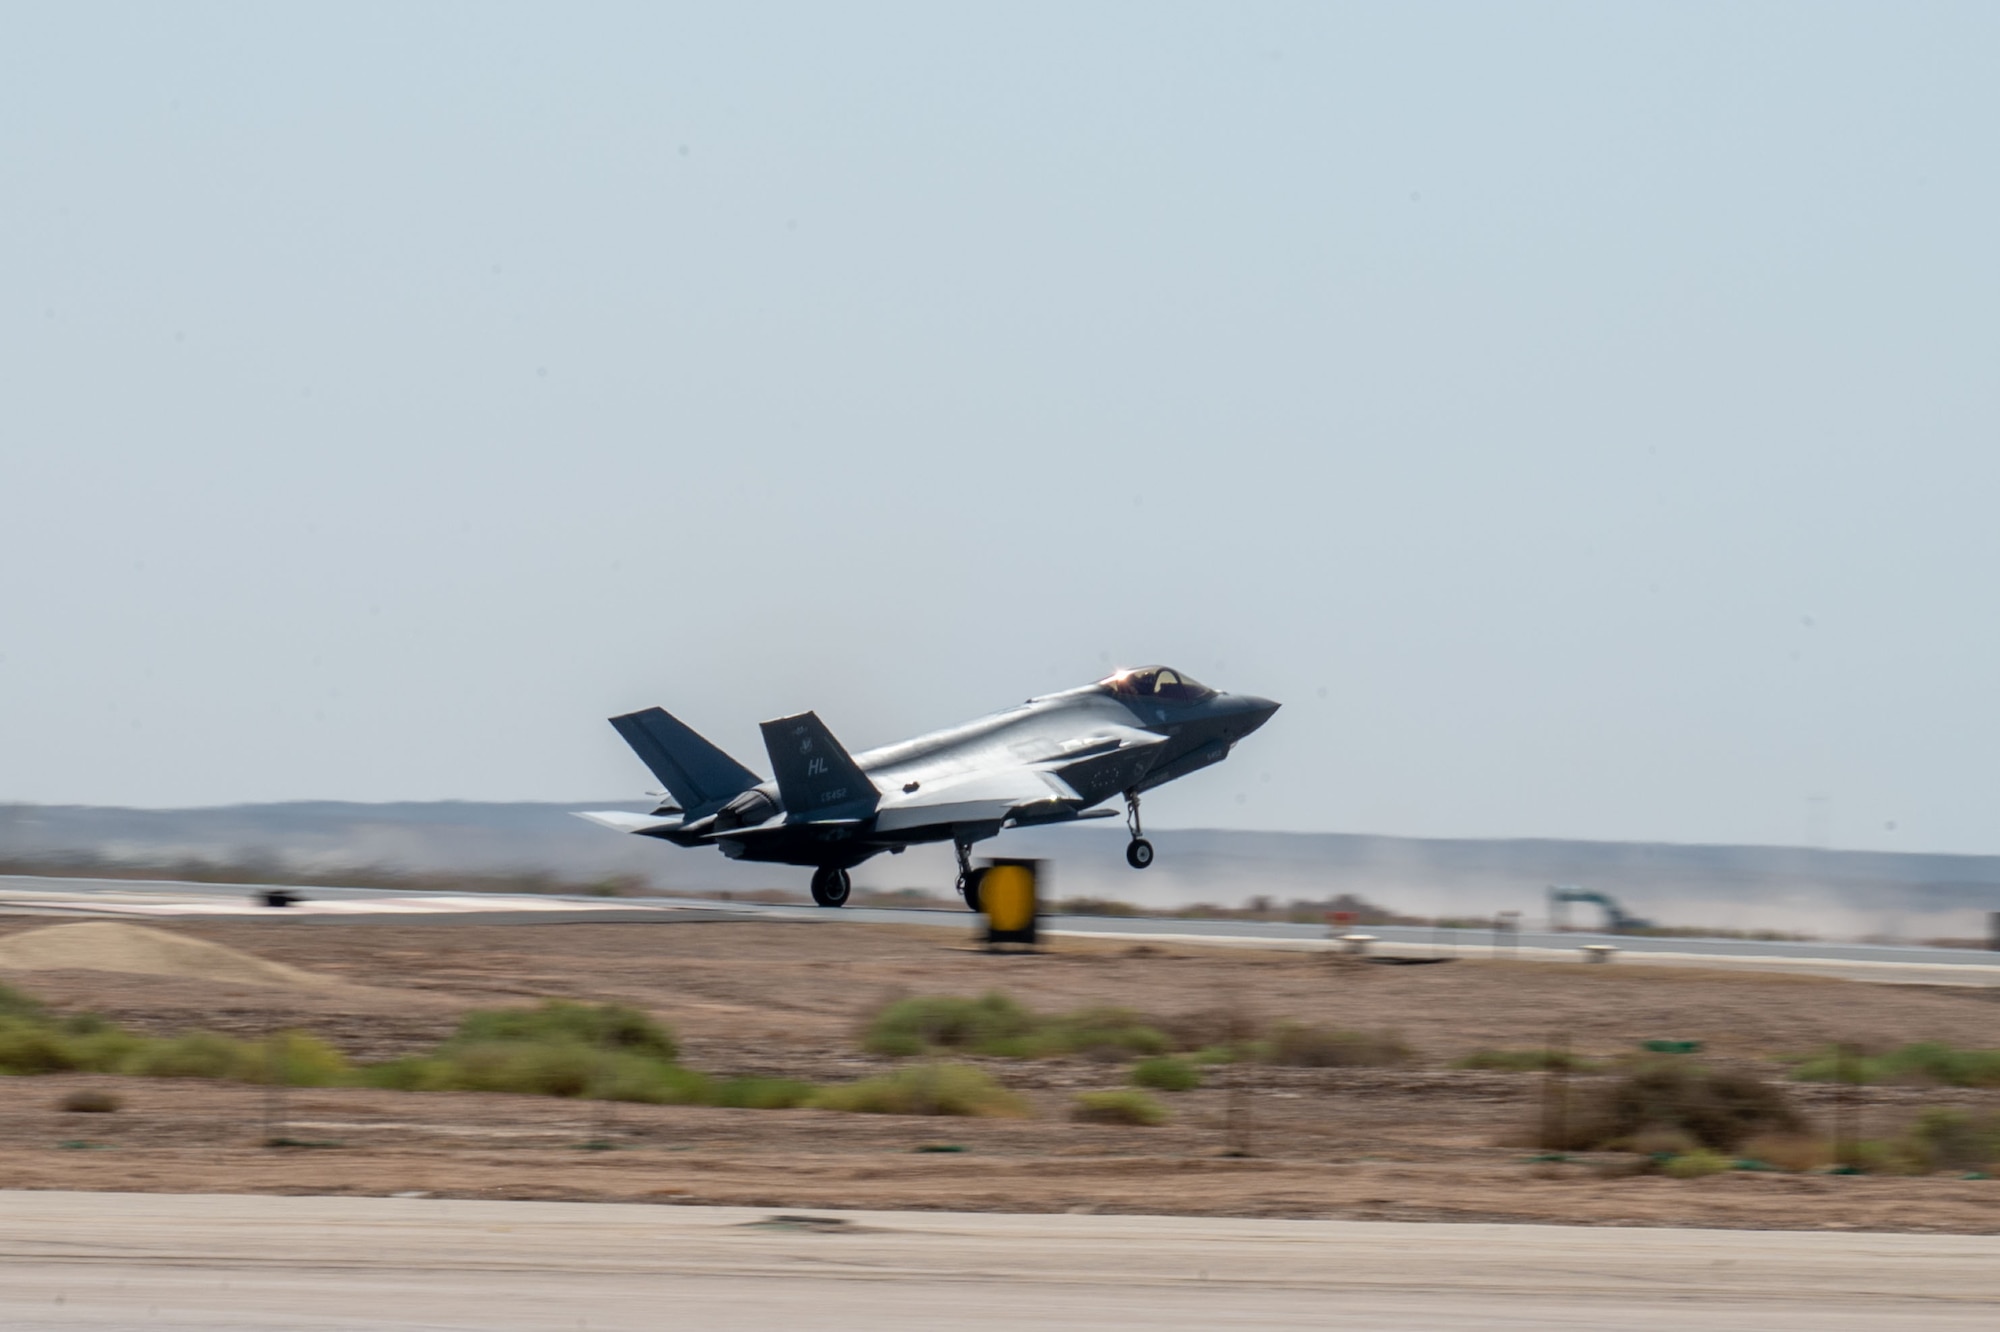 An U.S. Air Force F-35A Lightning II aircraft assigned to the 421st Expeditionary Fighter Squadron lands in the U.S. Central Command area of responsibility July 25, 2023. U.S. Air Force F-35’s have deployed to the U.S. Central Command Area of Responsibility to help defend U.S. interests, promote regional security and safeguard freedom of navigation. (U.S. Air Force photo by Staff Sgt. Christopher Sommers)